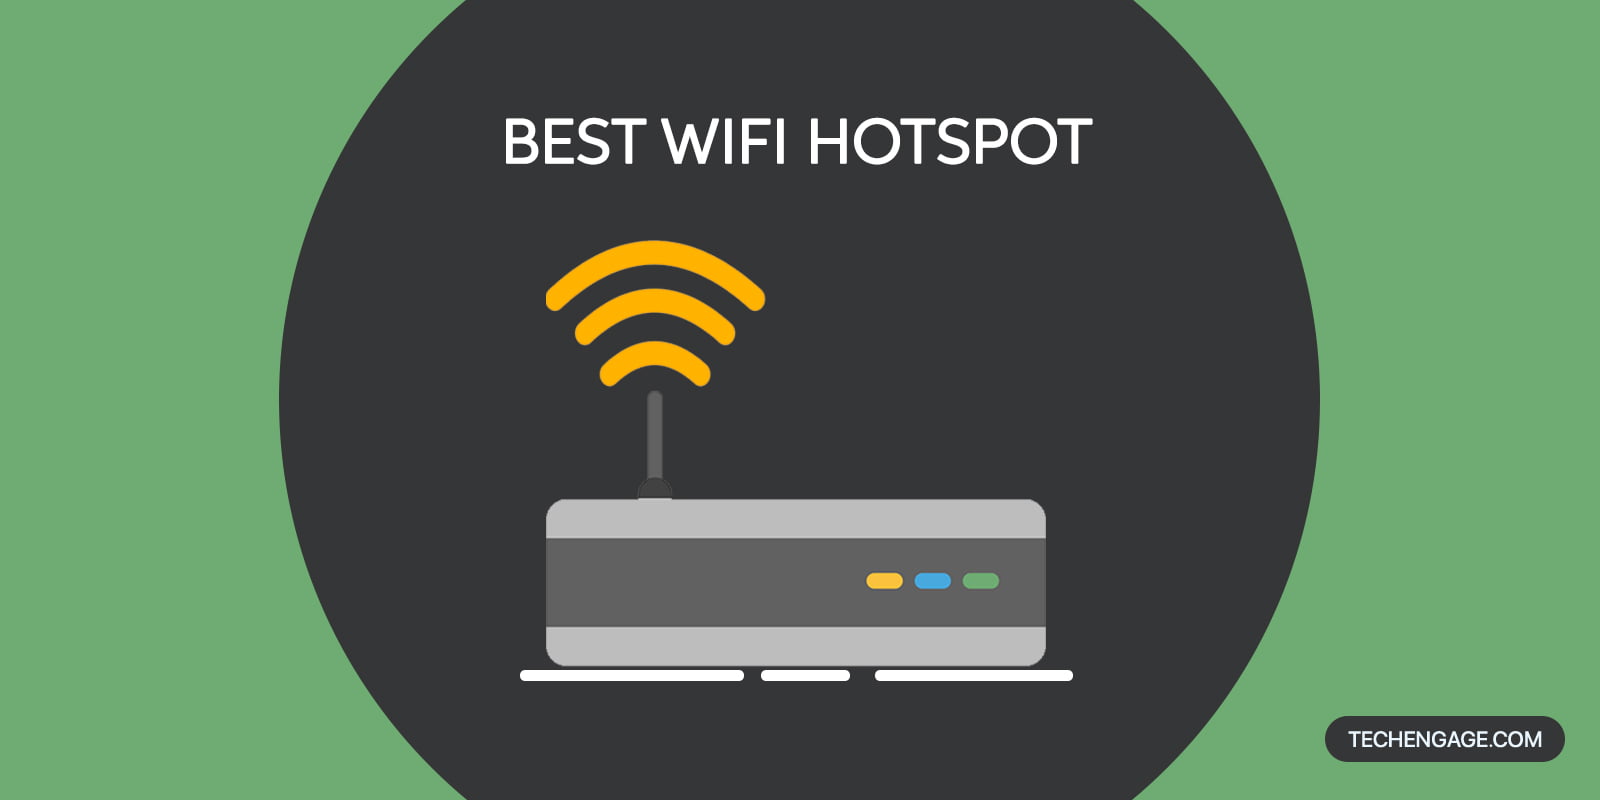 Best mobile Wi-Fi hotspots on Amazon for 2022